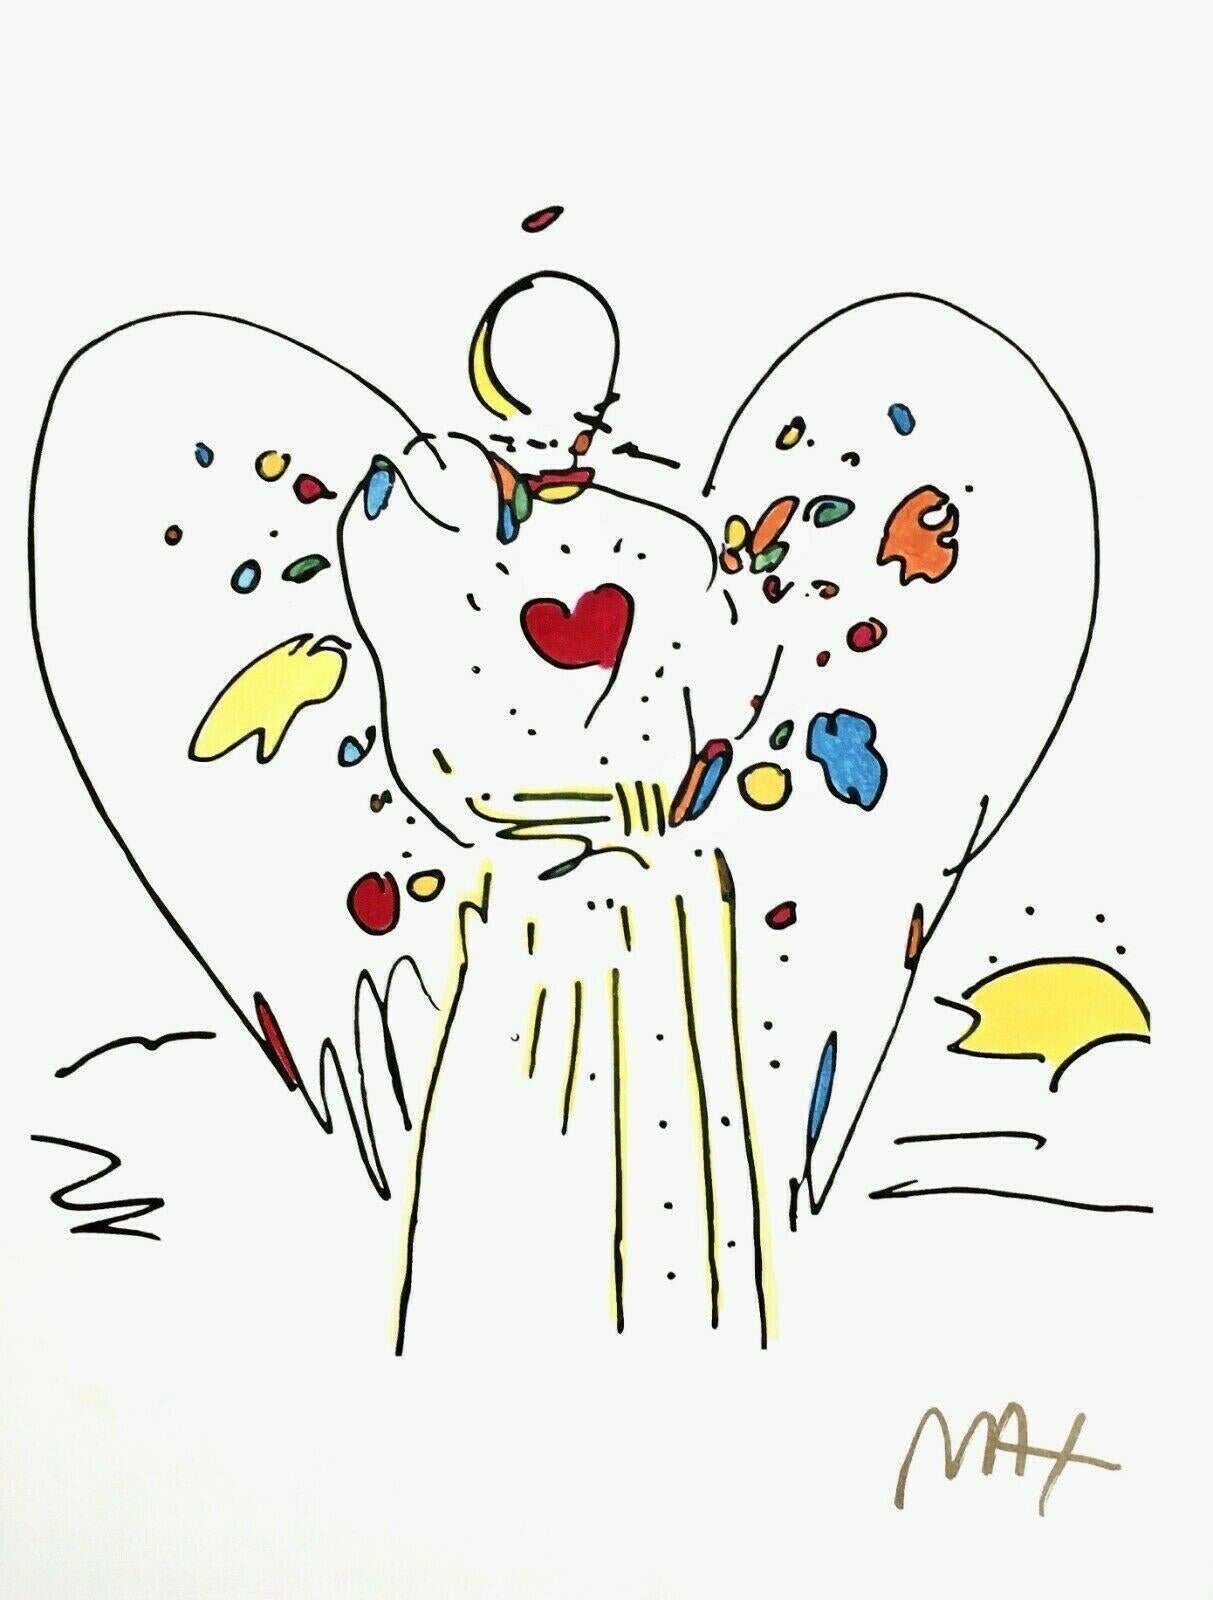 Artist: Peter Max (1937)
Title: Angel with Heart
Year: circa 1998
Medium: Silkscreen and watercolor on Arches paper
Size: 15 x 11 inches
Condition: Excellent
Inscription: Signed in gold permanent marker.

PETER MAX (1937- ) Peter Max has achieved